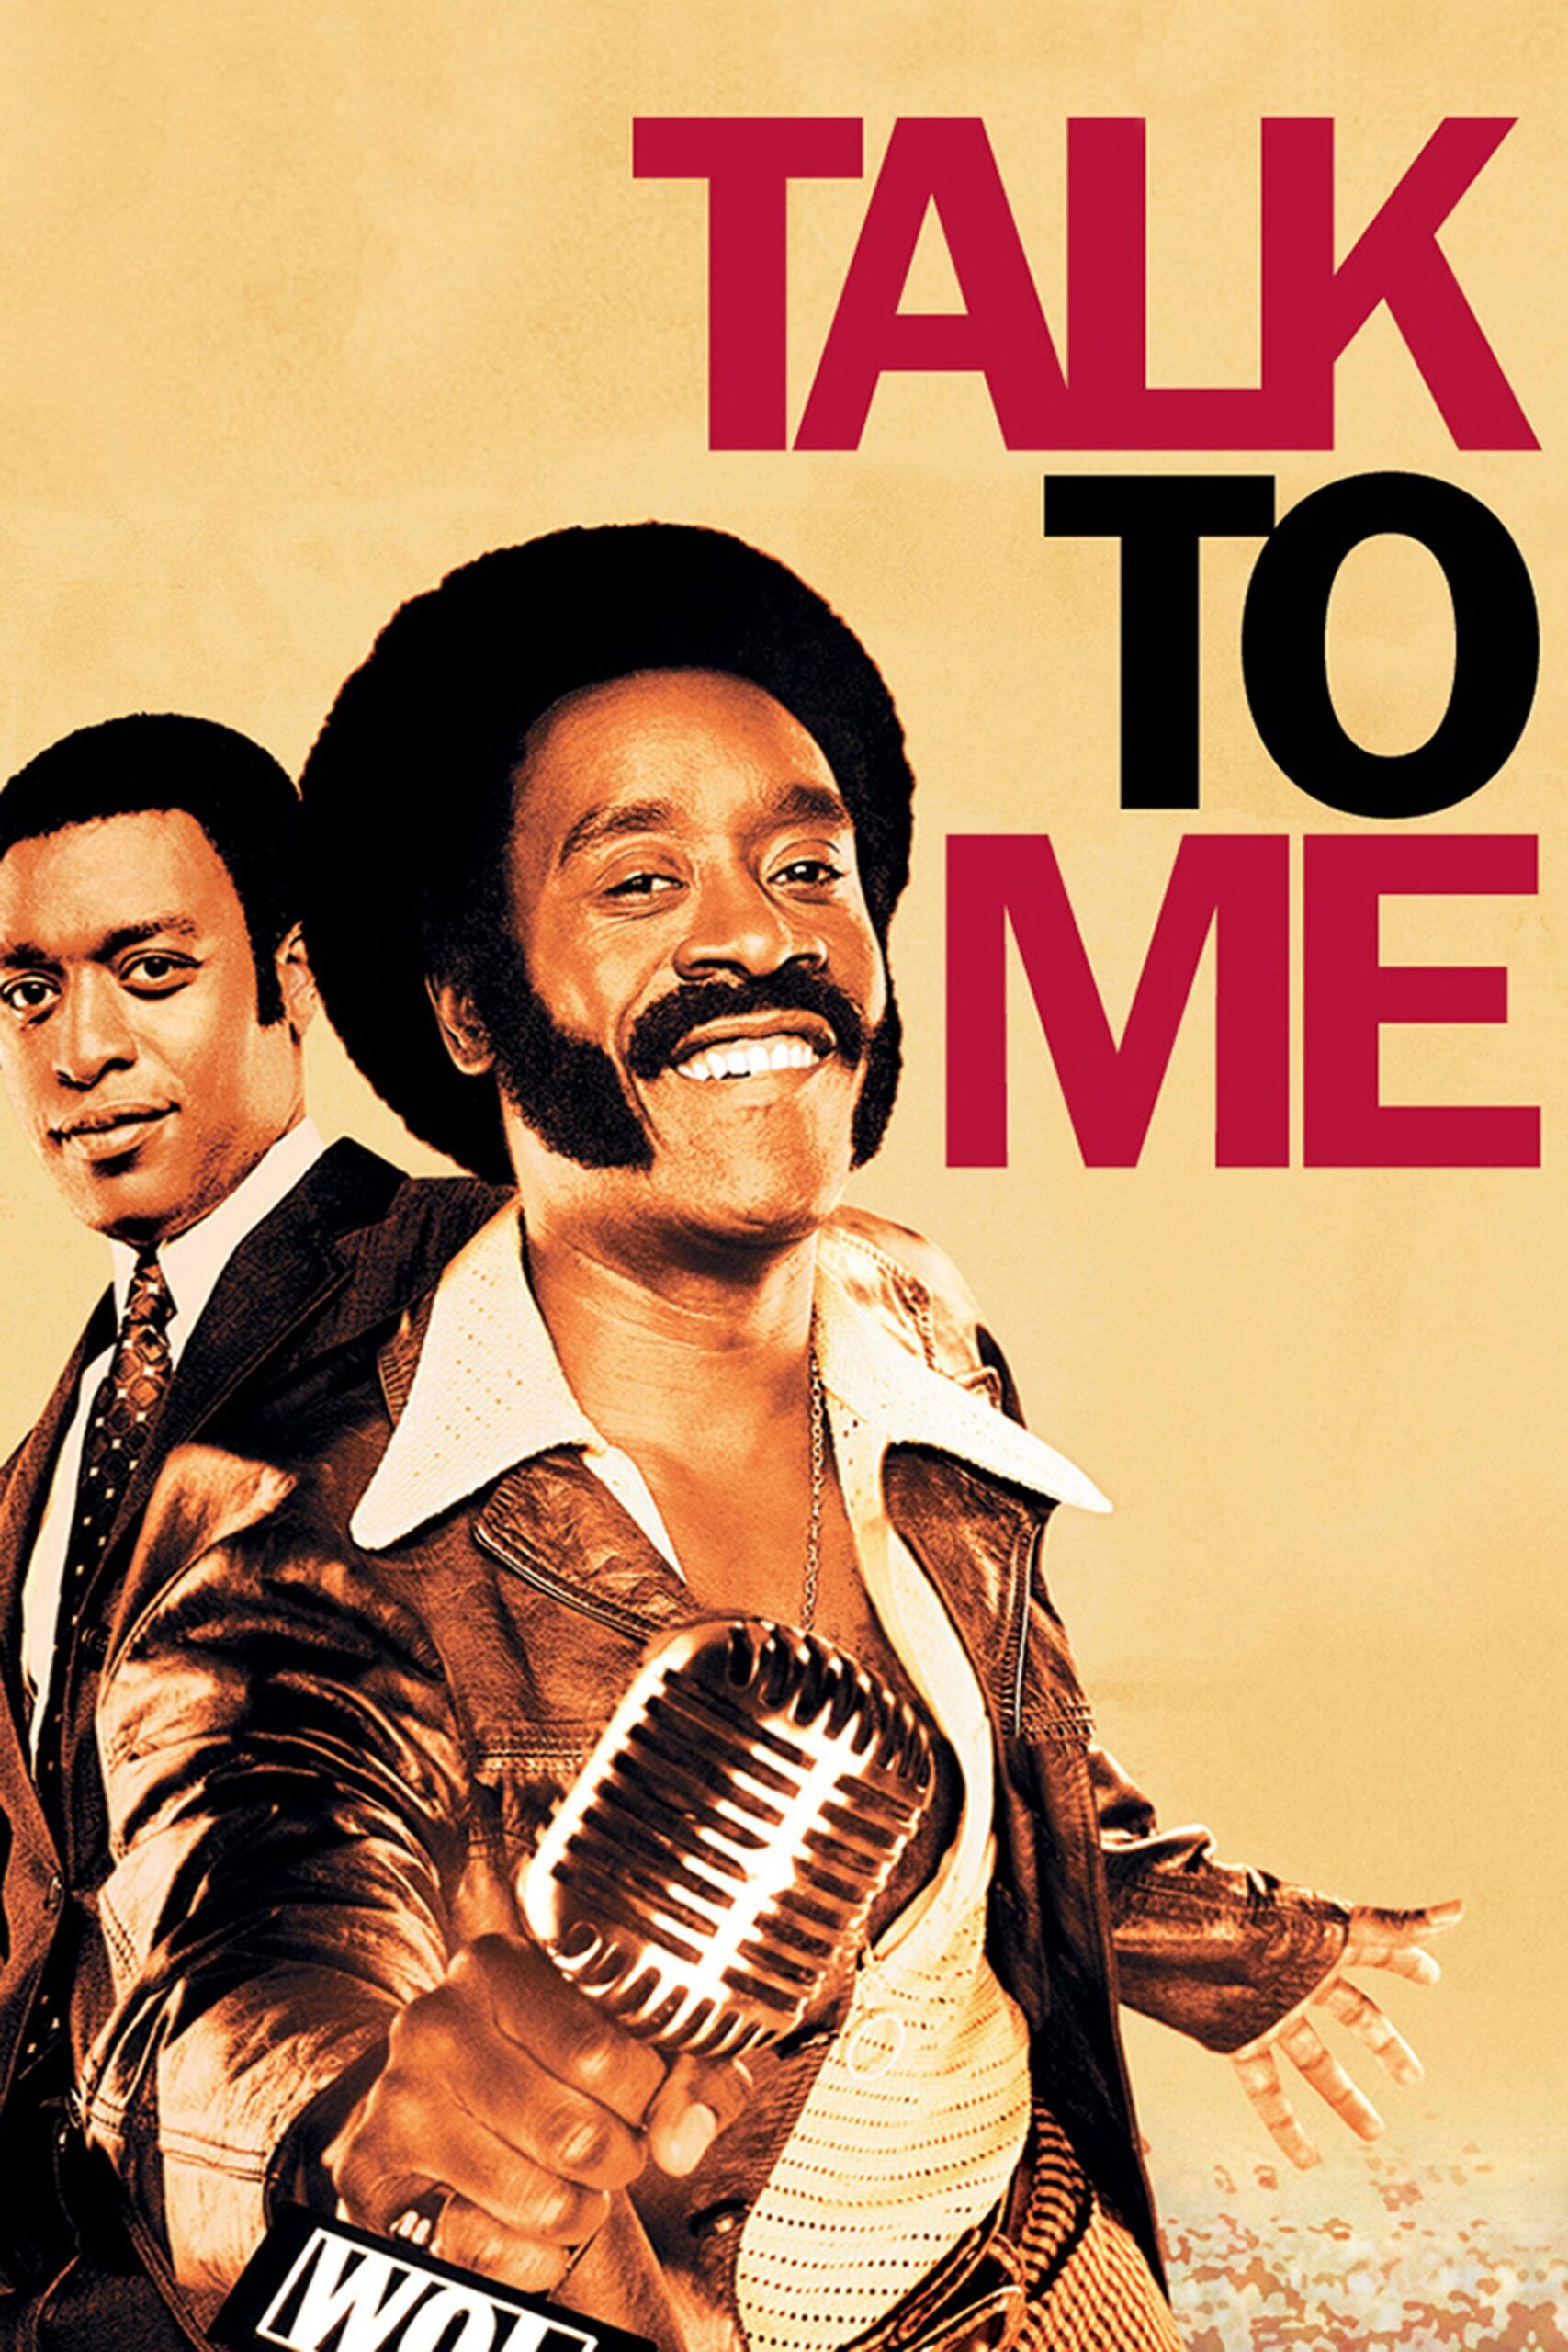 Don Cheadle plays the DC radio pioneer Petey Greene in the movie Talk To Me